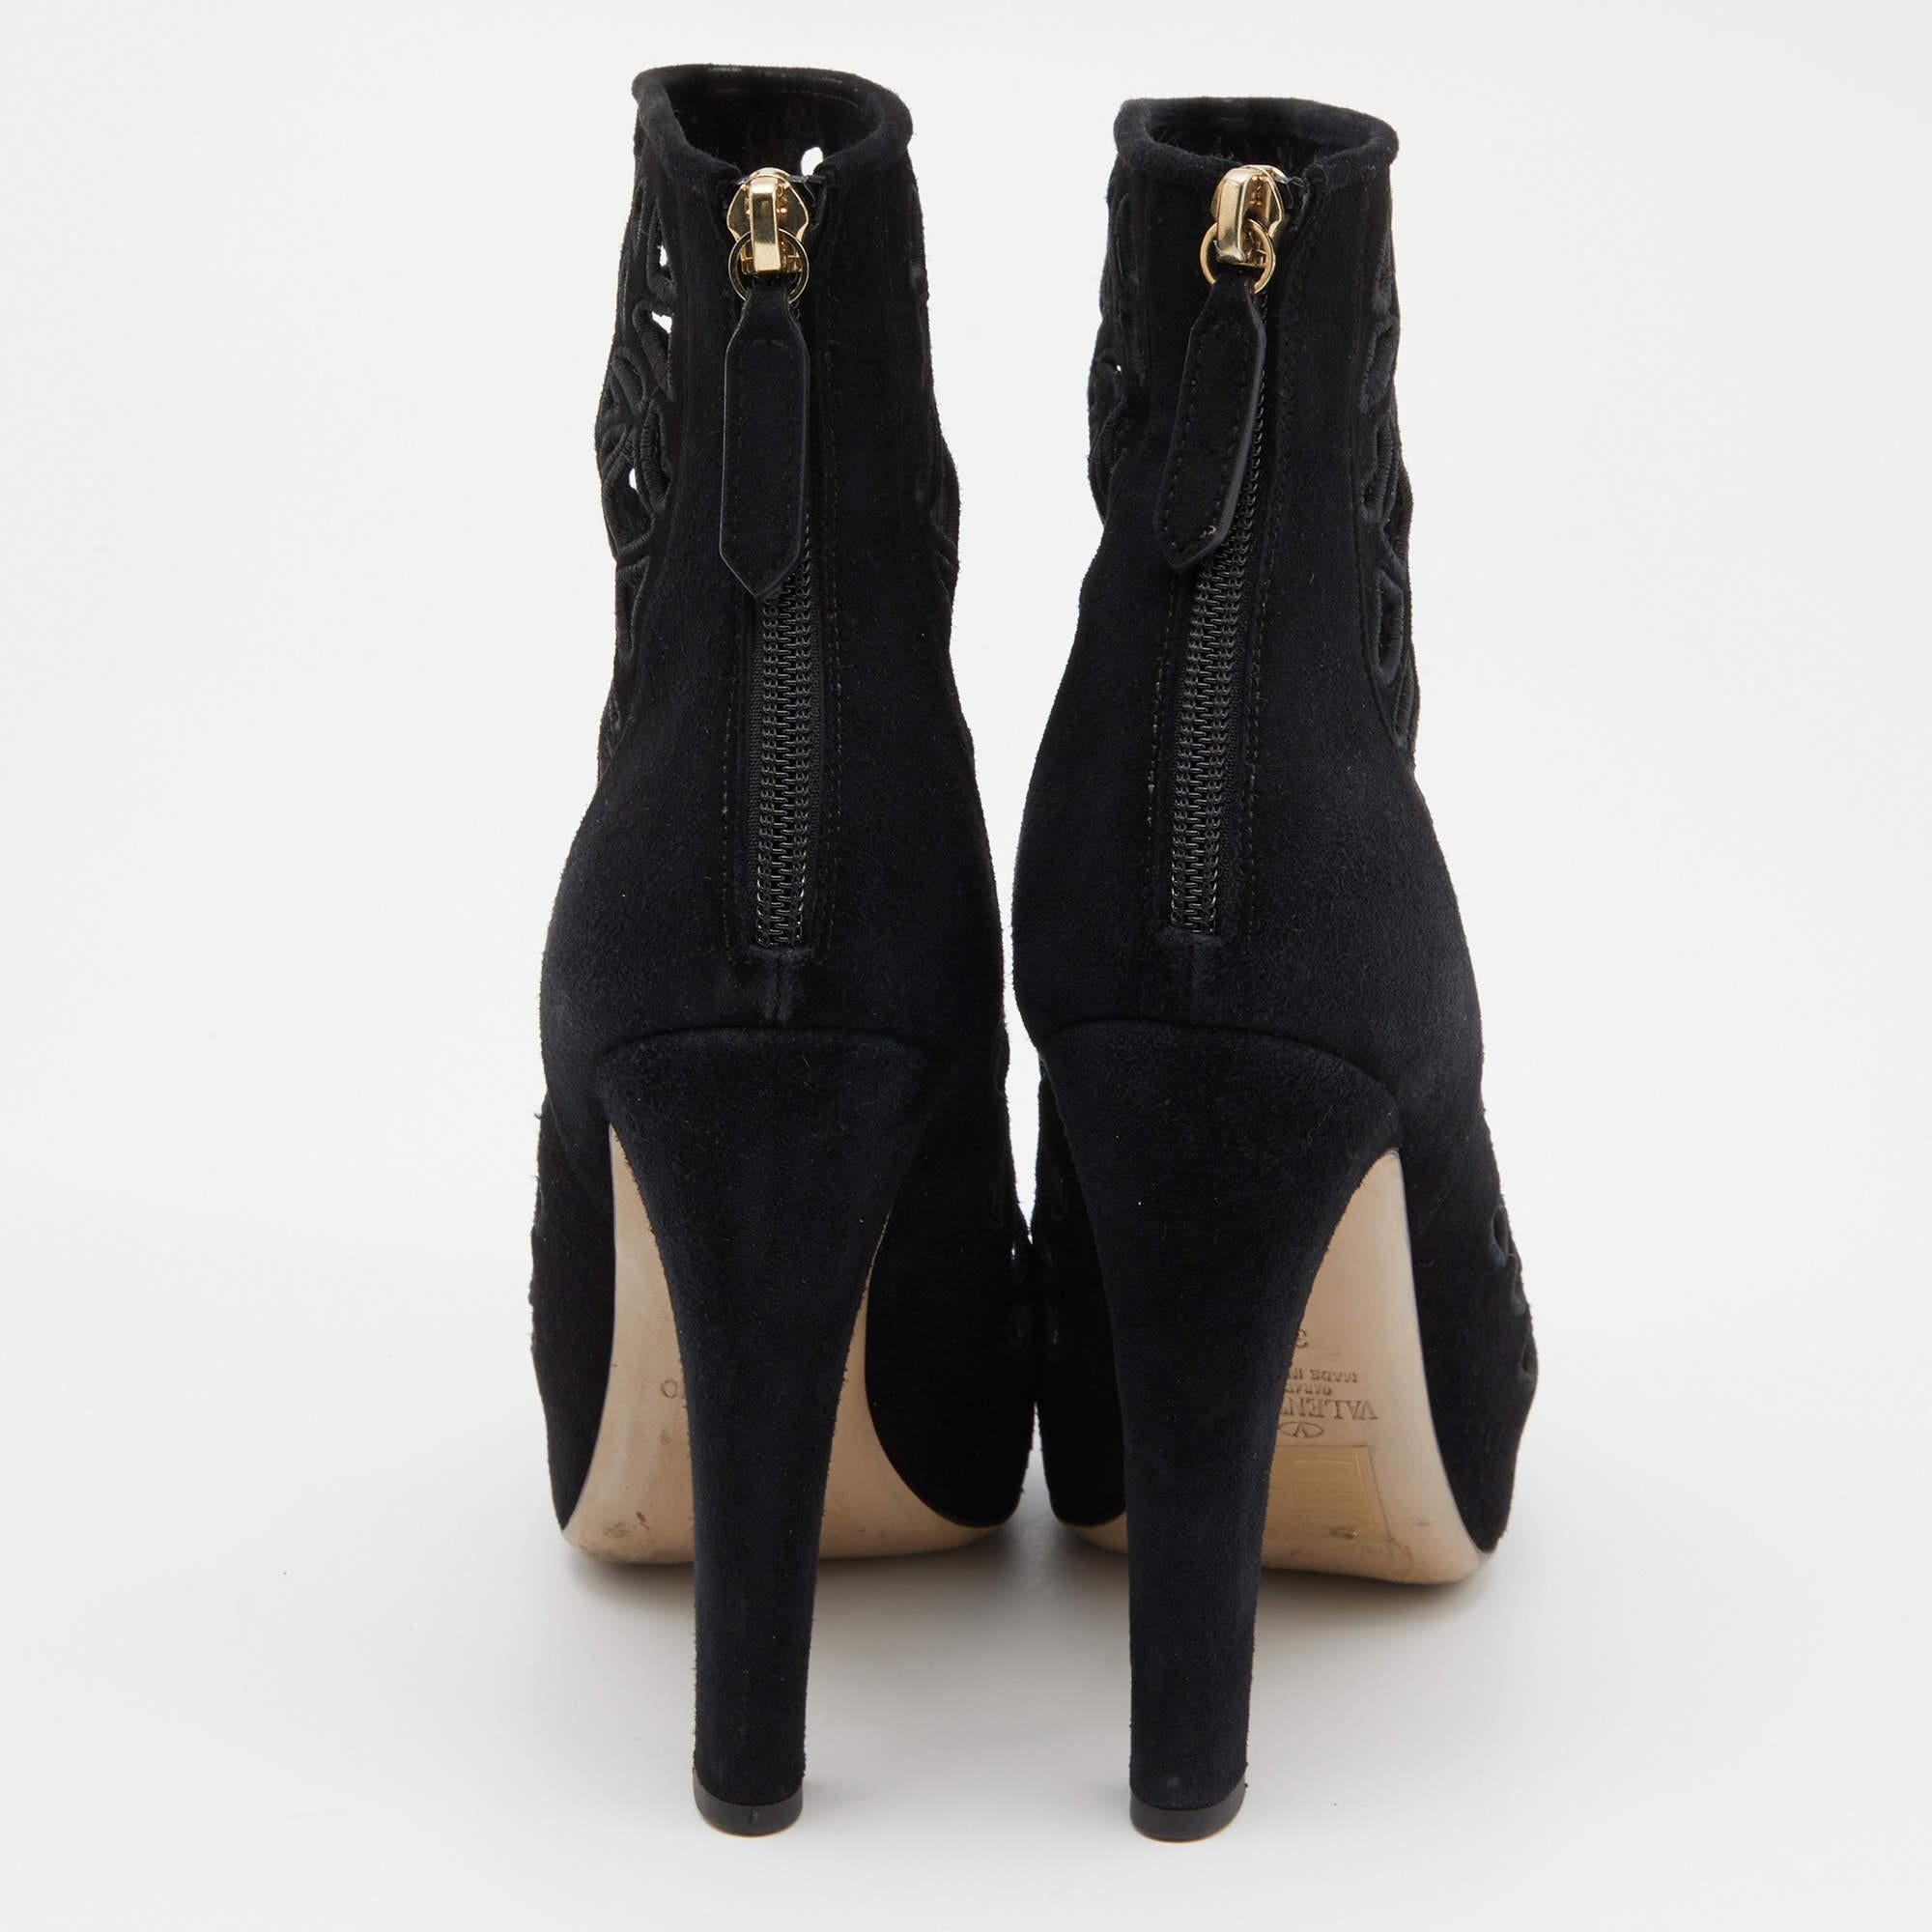 Valentino Black Laser Cut Suede Ankle Length Boots Size 38 In Good Condition For Sale In Dubai, Al Qouz 2